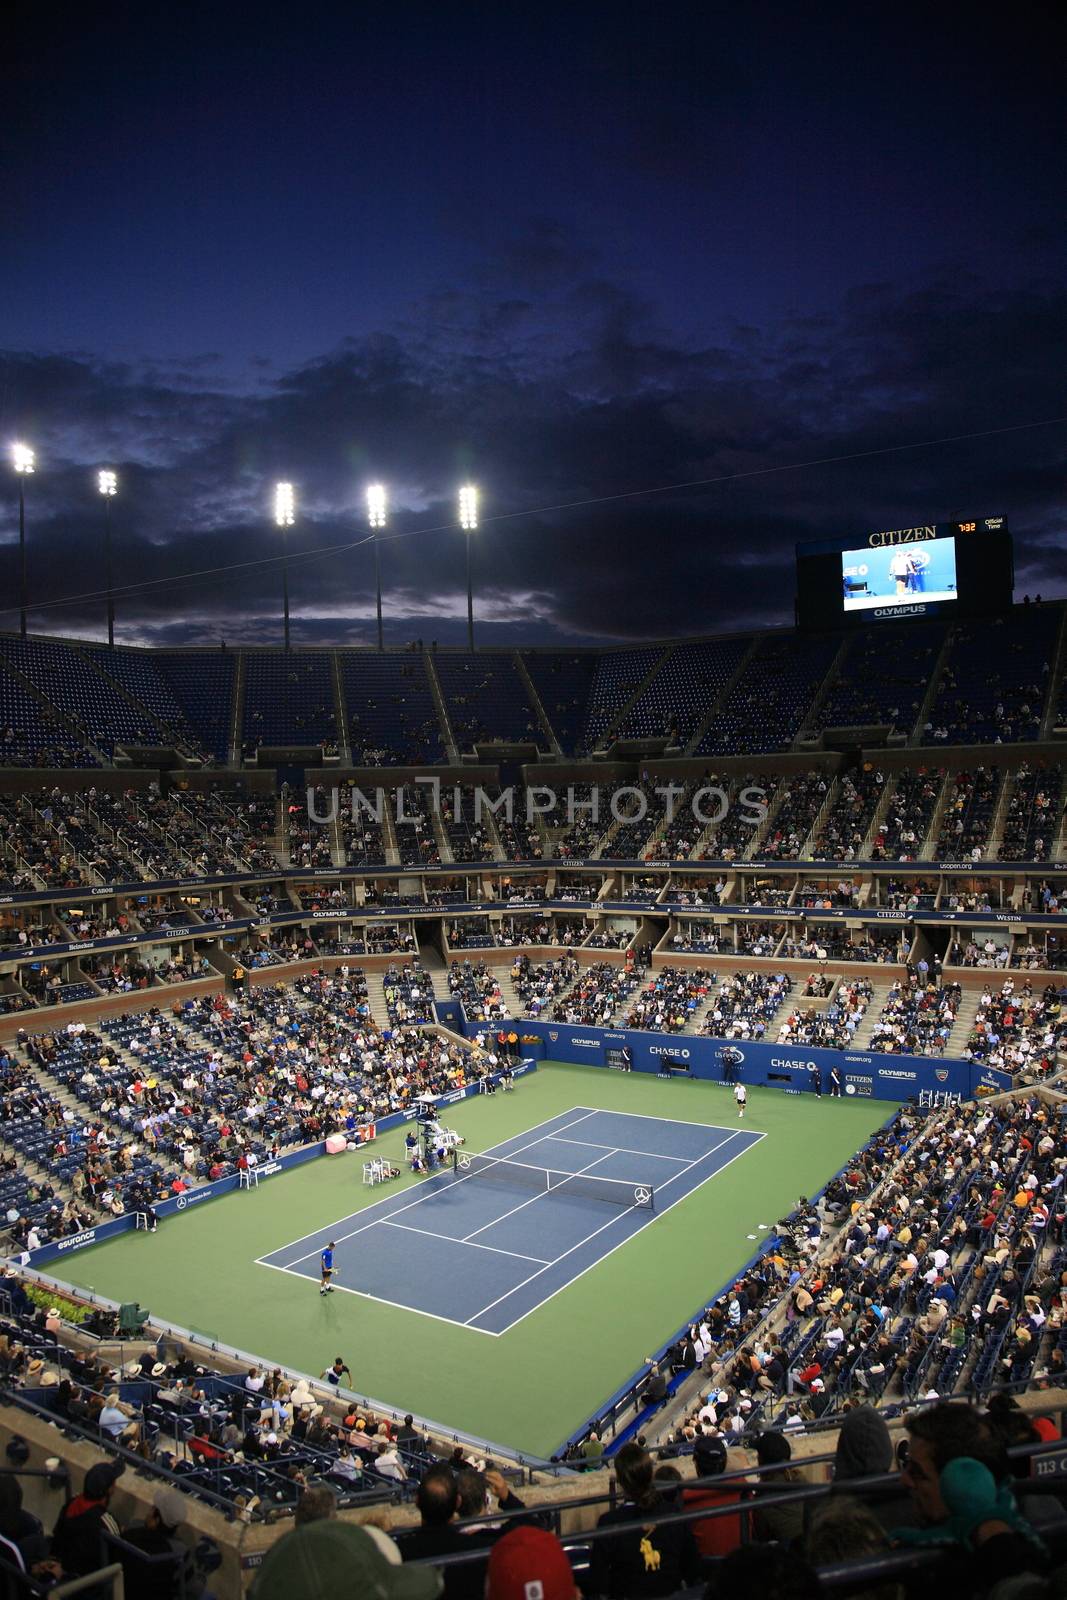 A crowded Arthur Ashe Stadium for a night U.S. Open tennis match in Queens, New York City